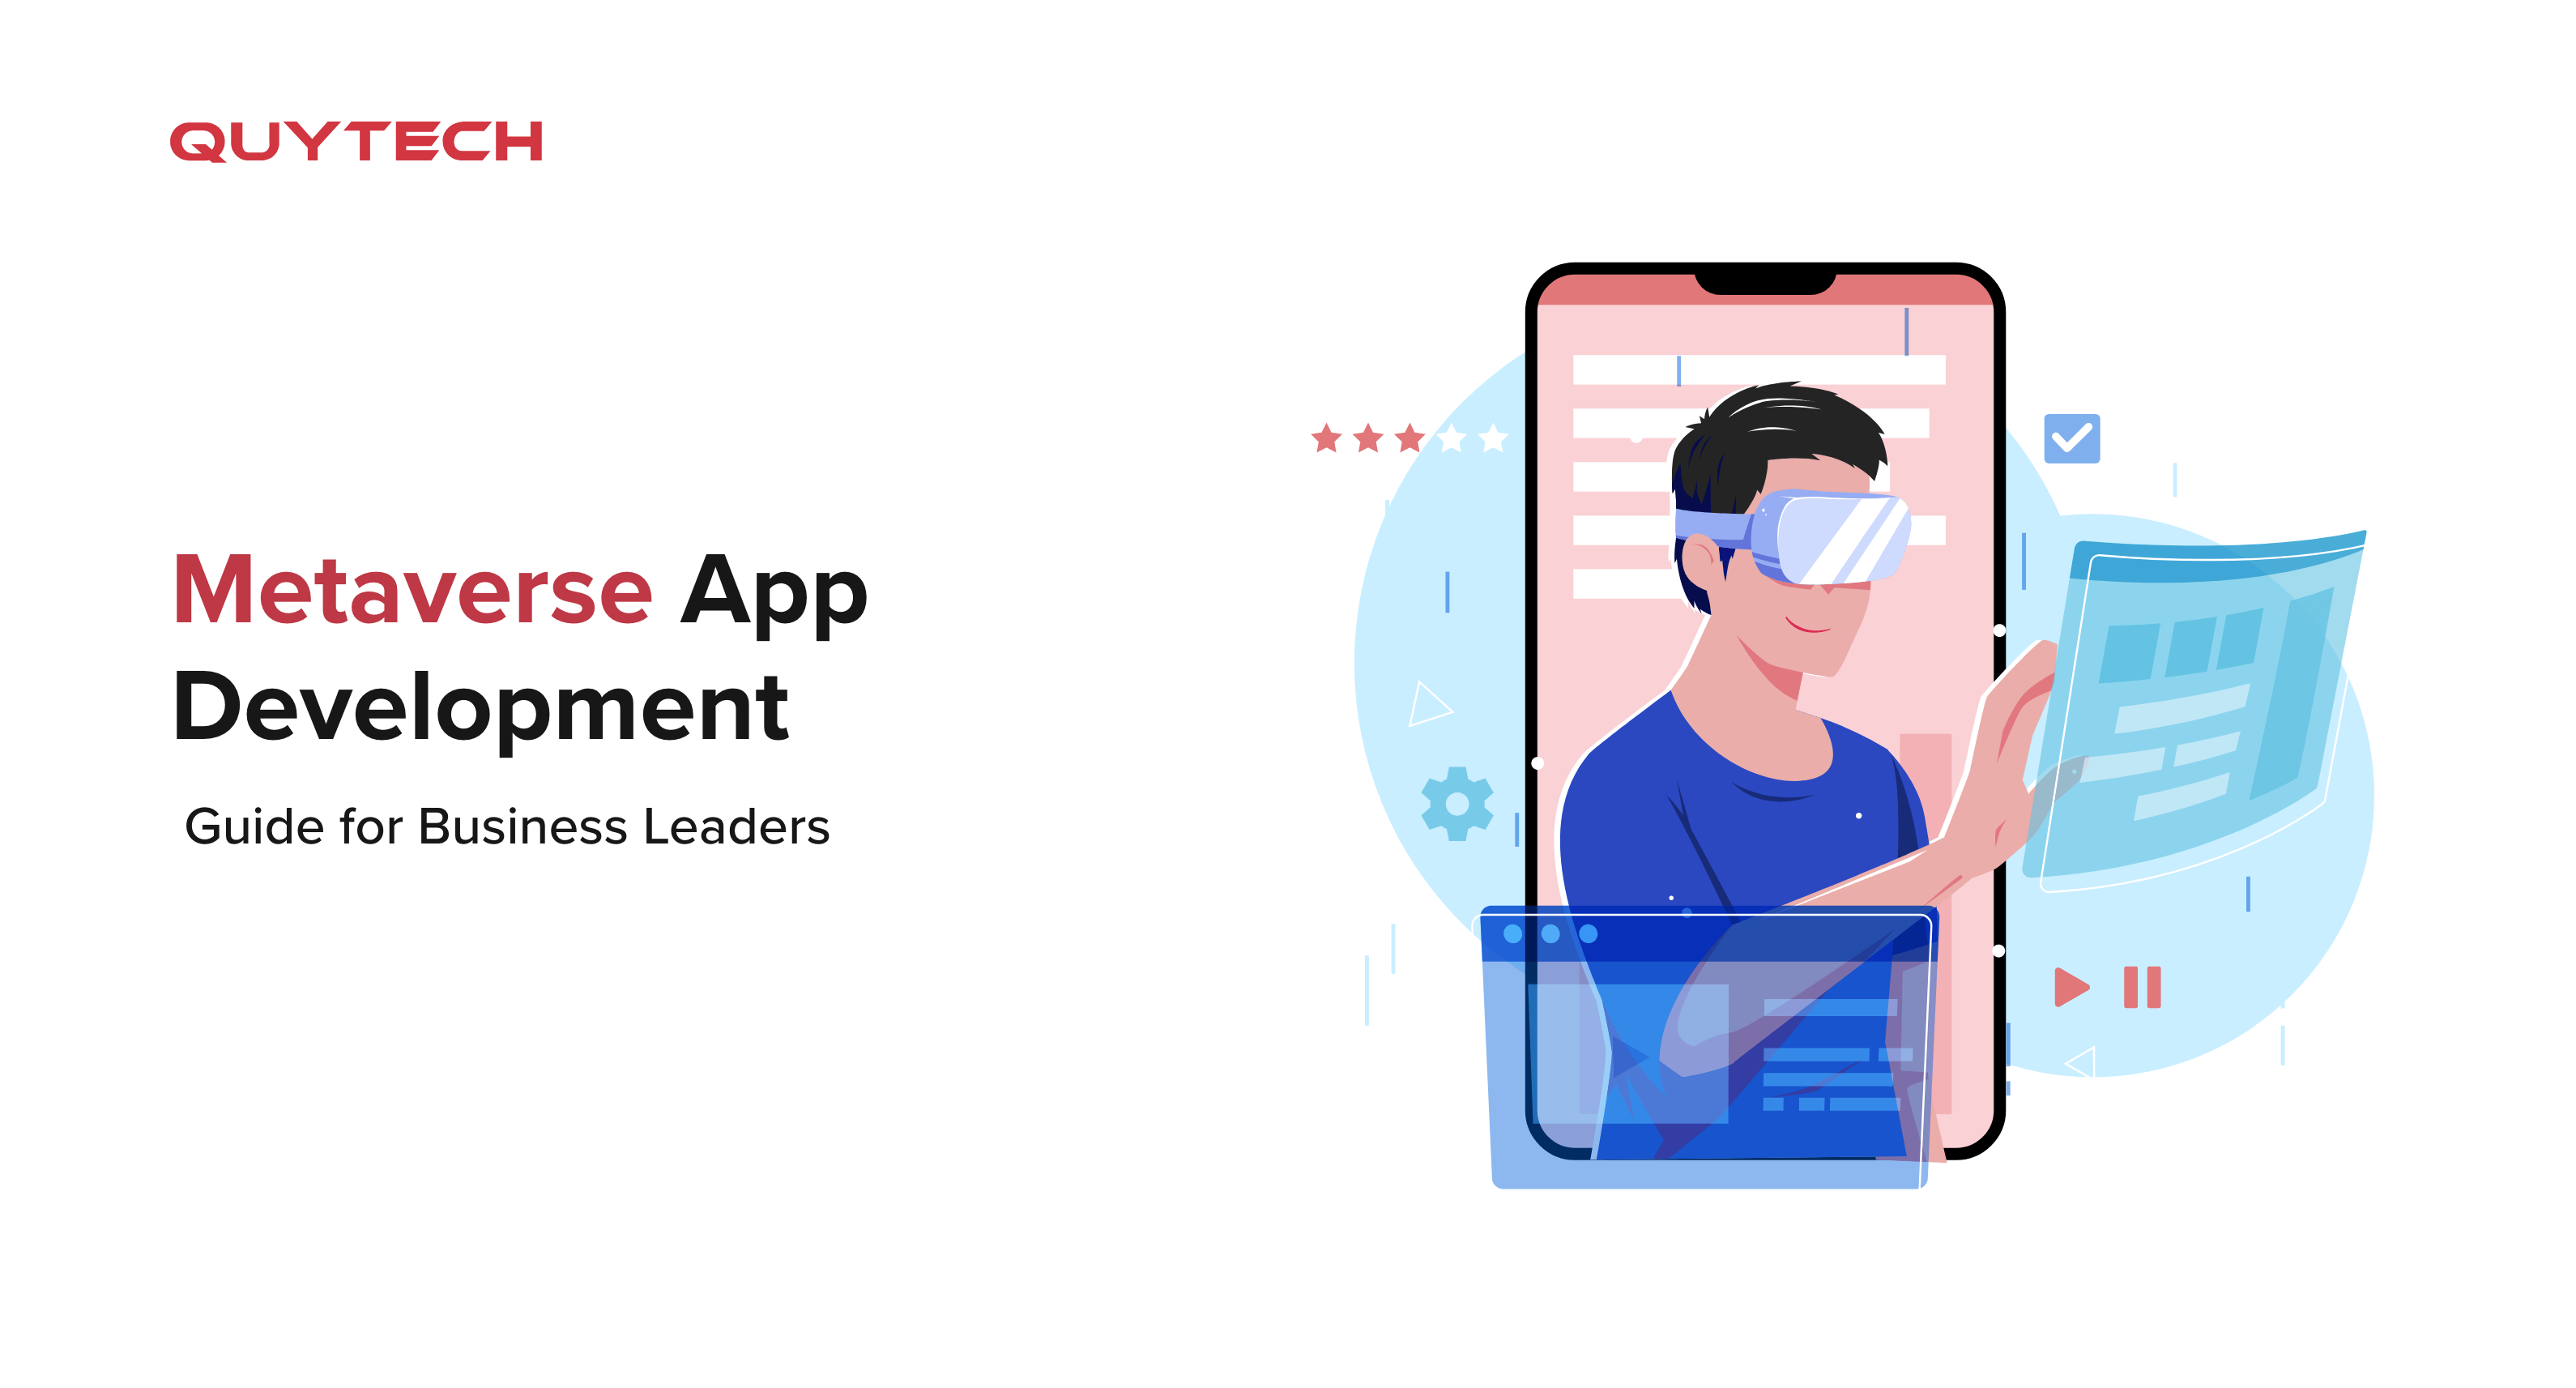 Metaverse App Development Guide for Business Leaders